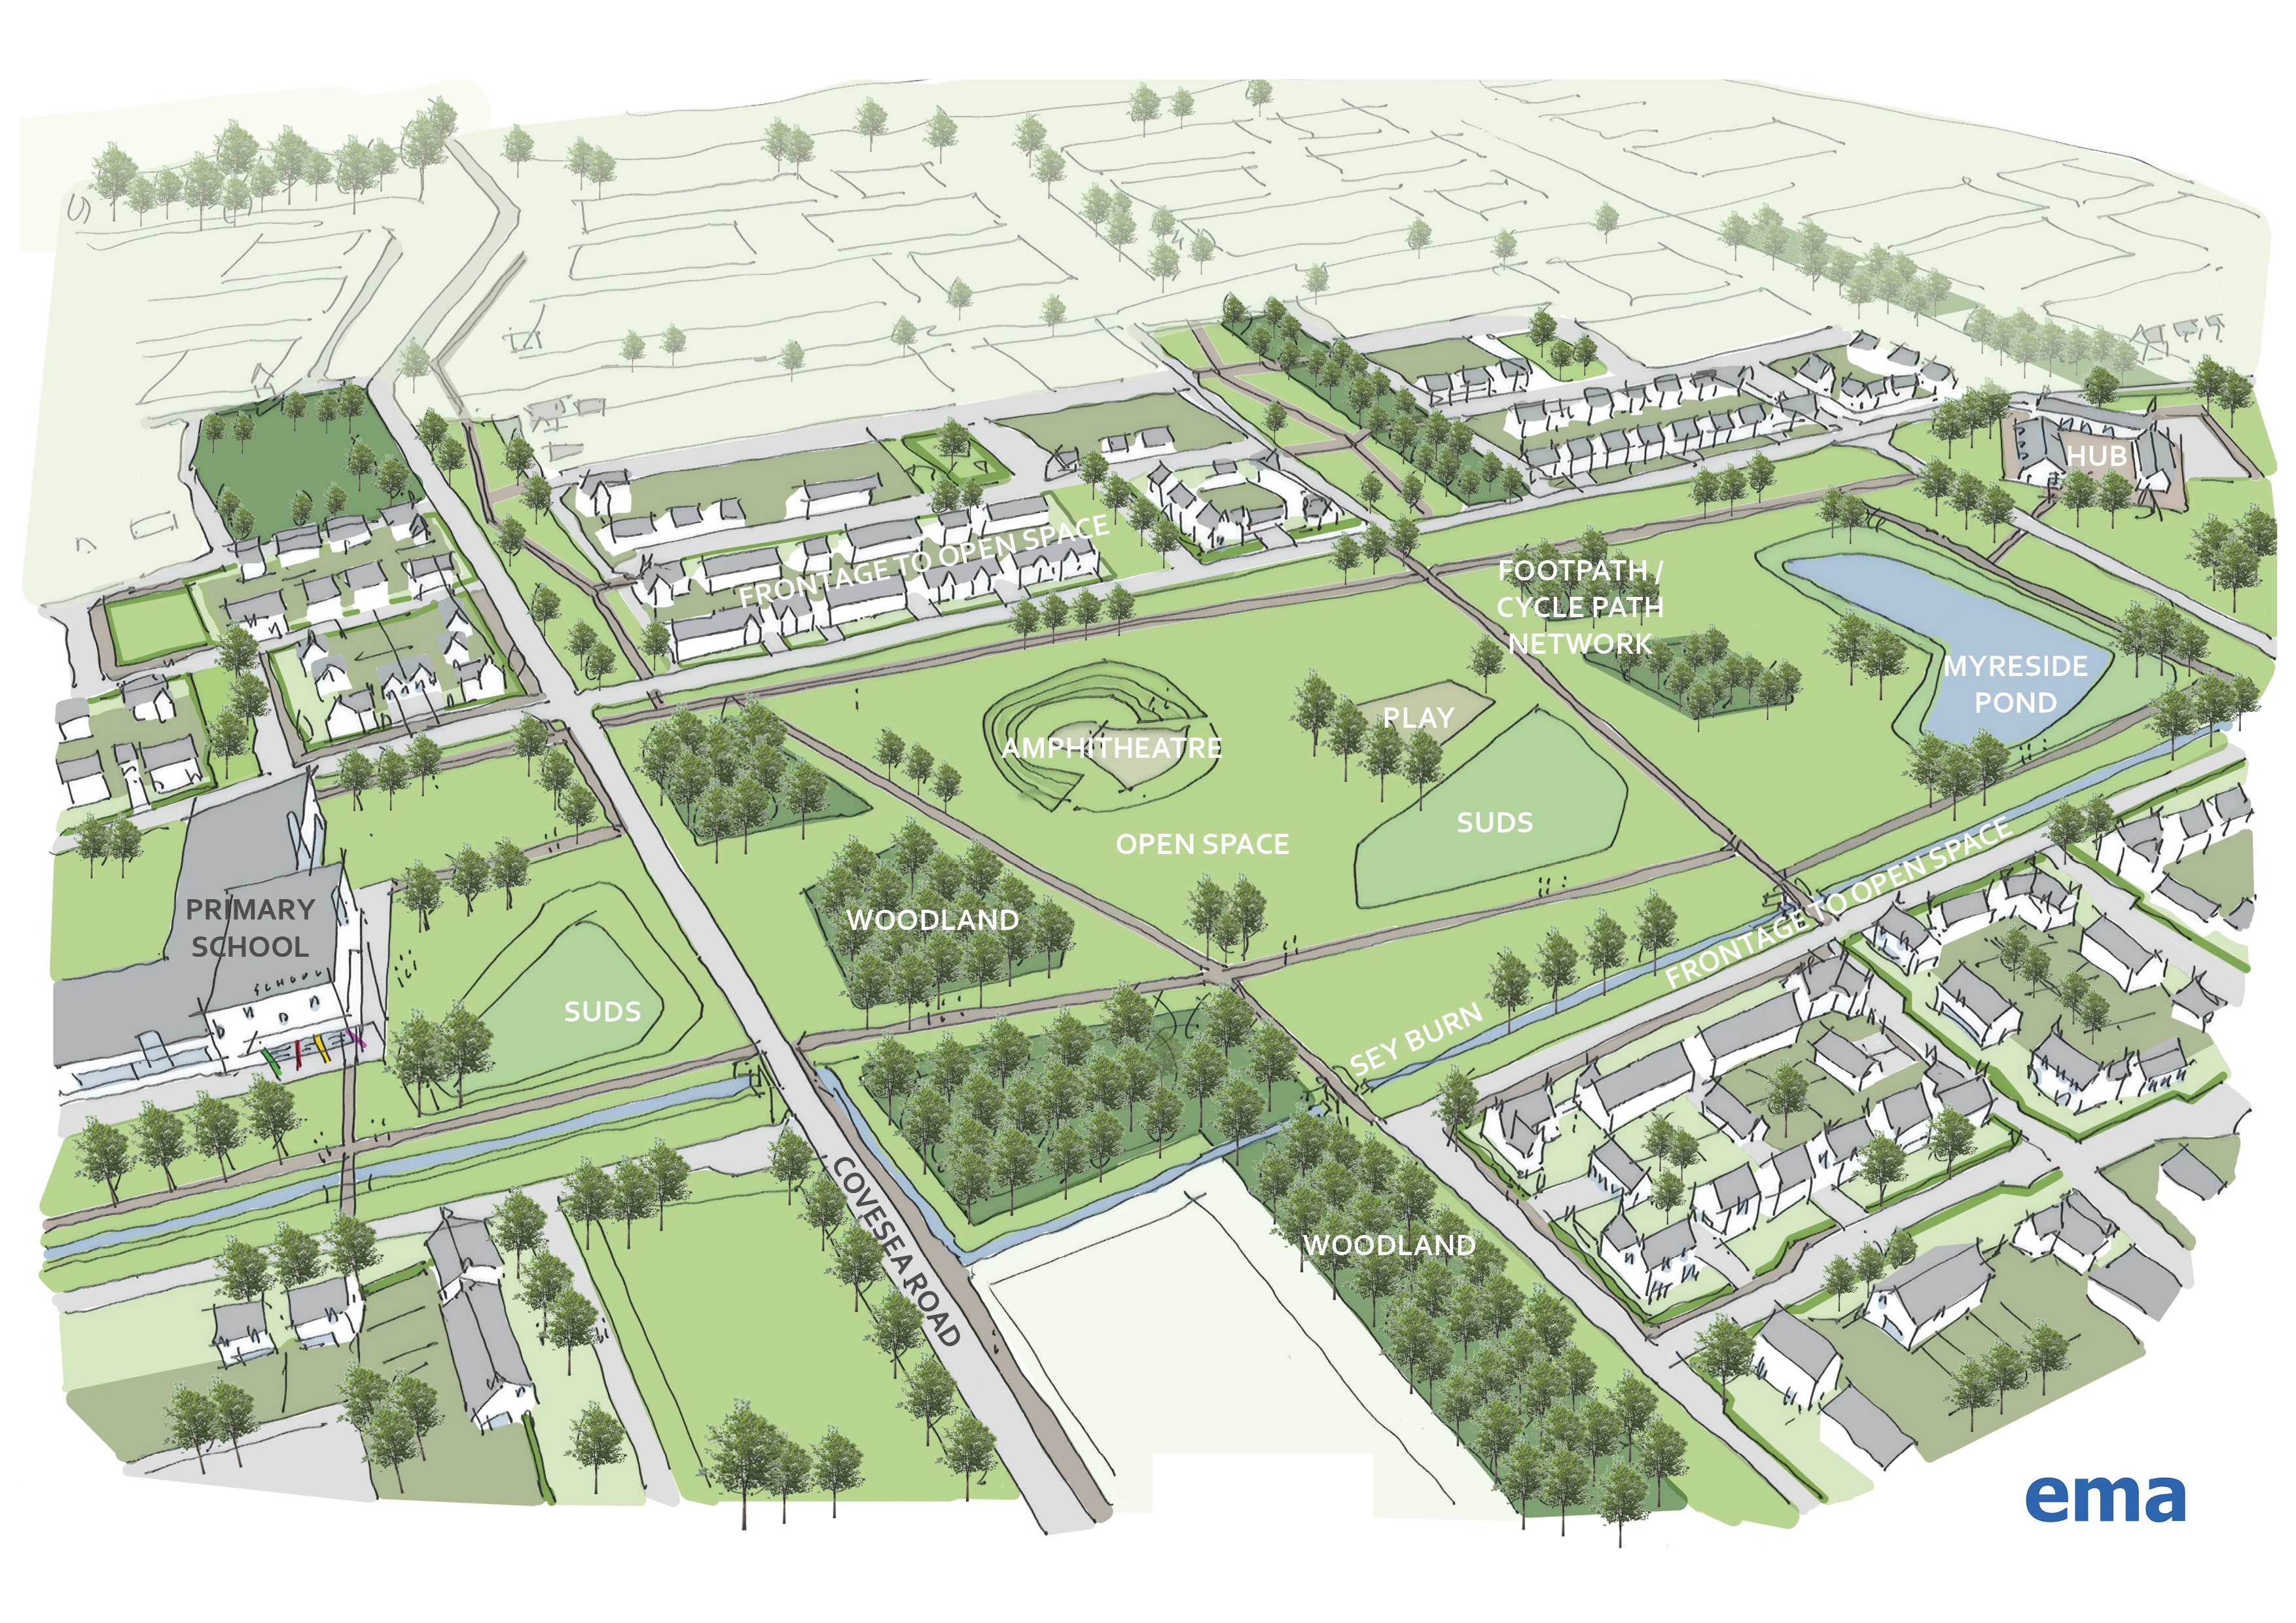 New Elgin neighbourhood receives planning consent as Barratt secures land to create first phase